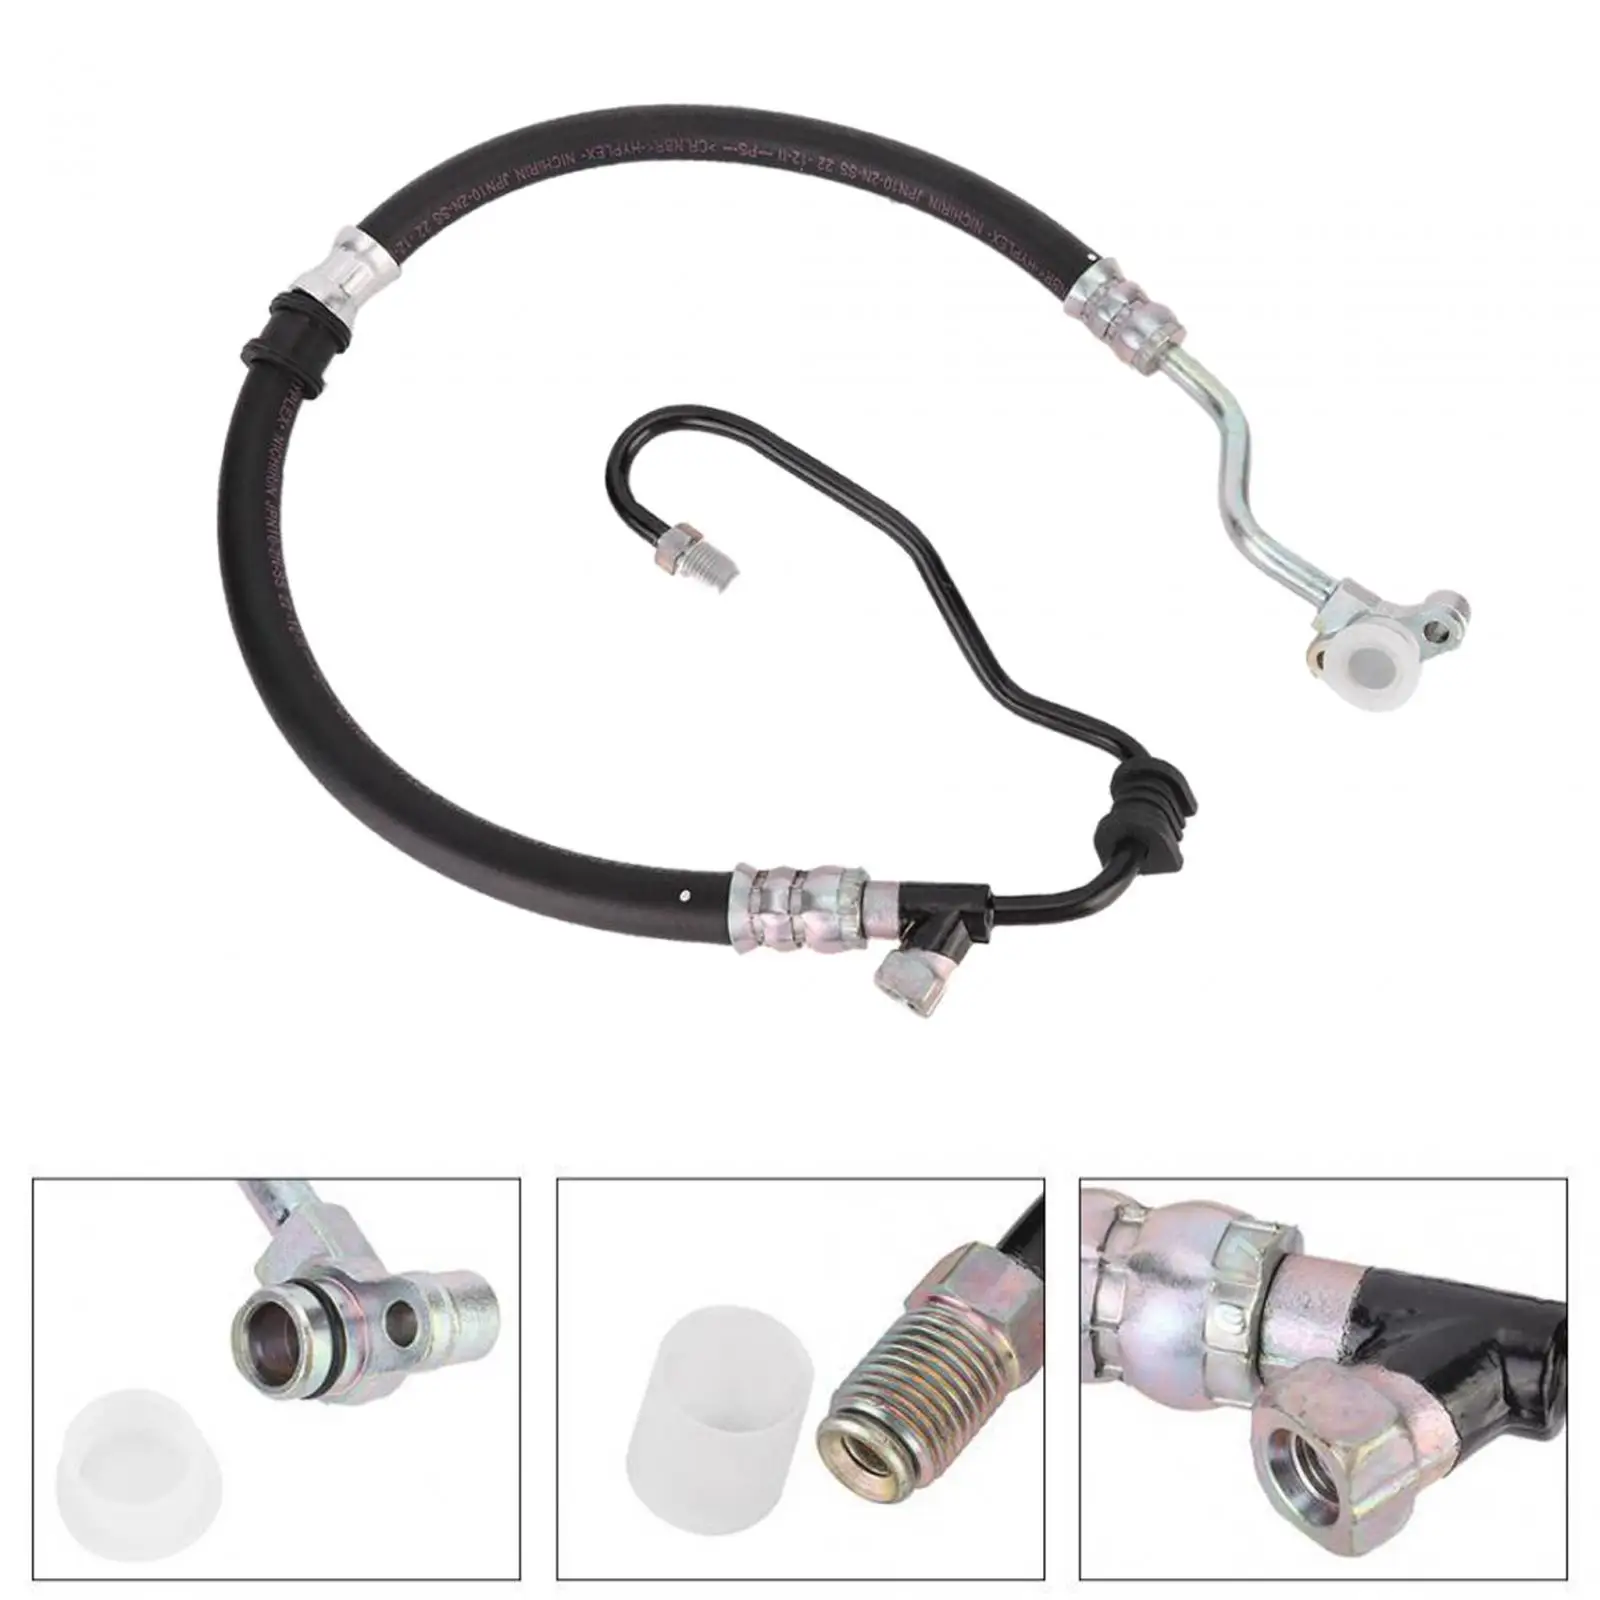 Power Steering Pressure Hose 53713-s84-a04 Durable Professional Accessory Replaces Easy to Install for Honda Accord L4 2.3L